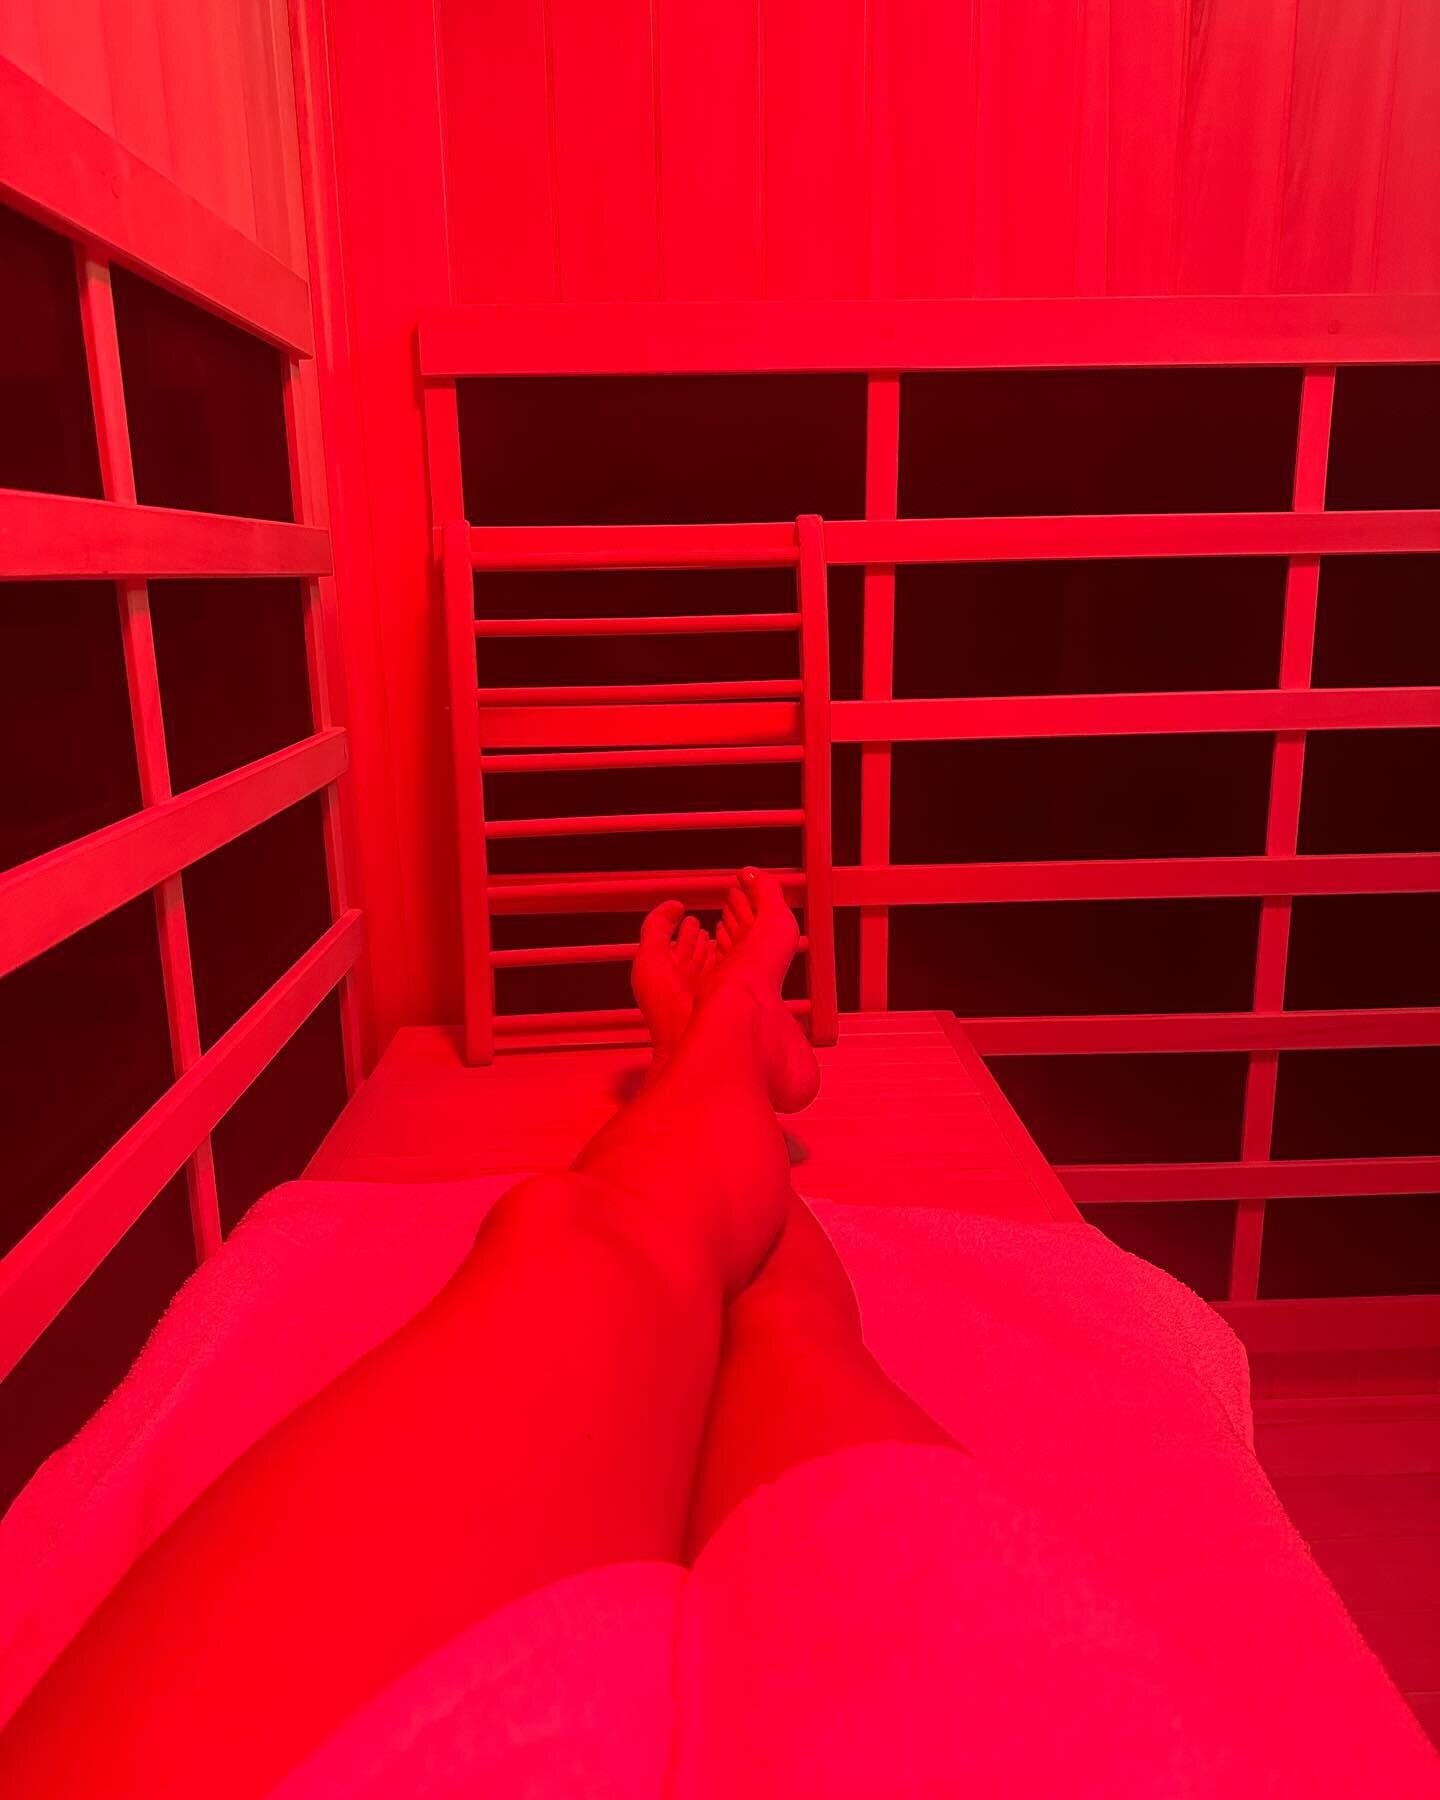 Come warm up on this rainy 🌧️ day in our Infrared Sauna!